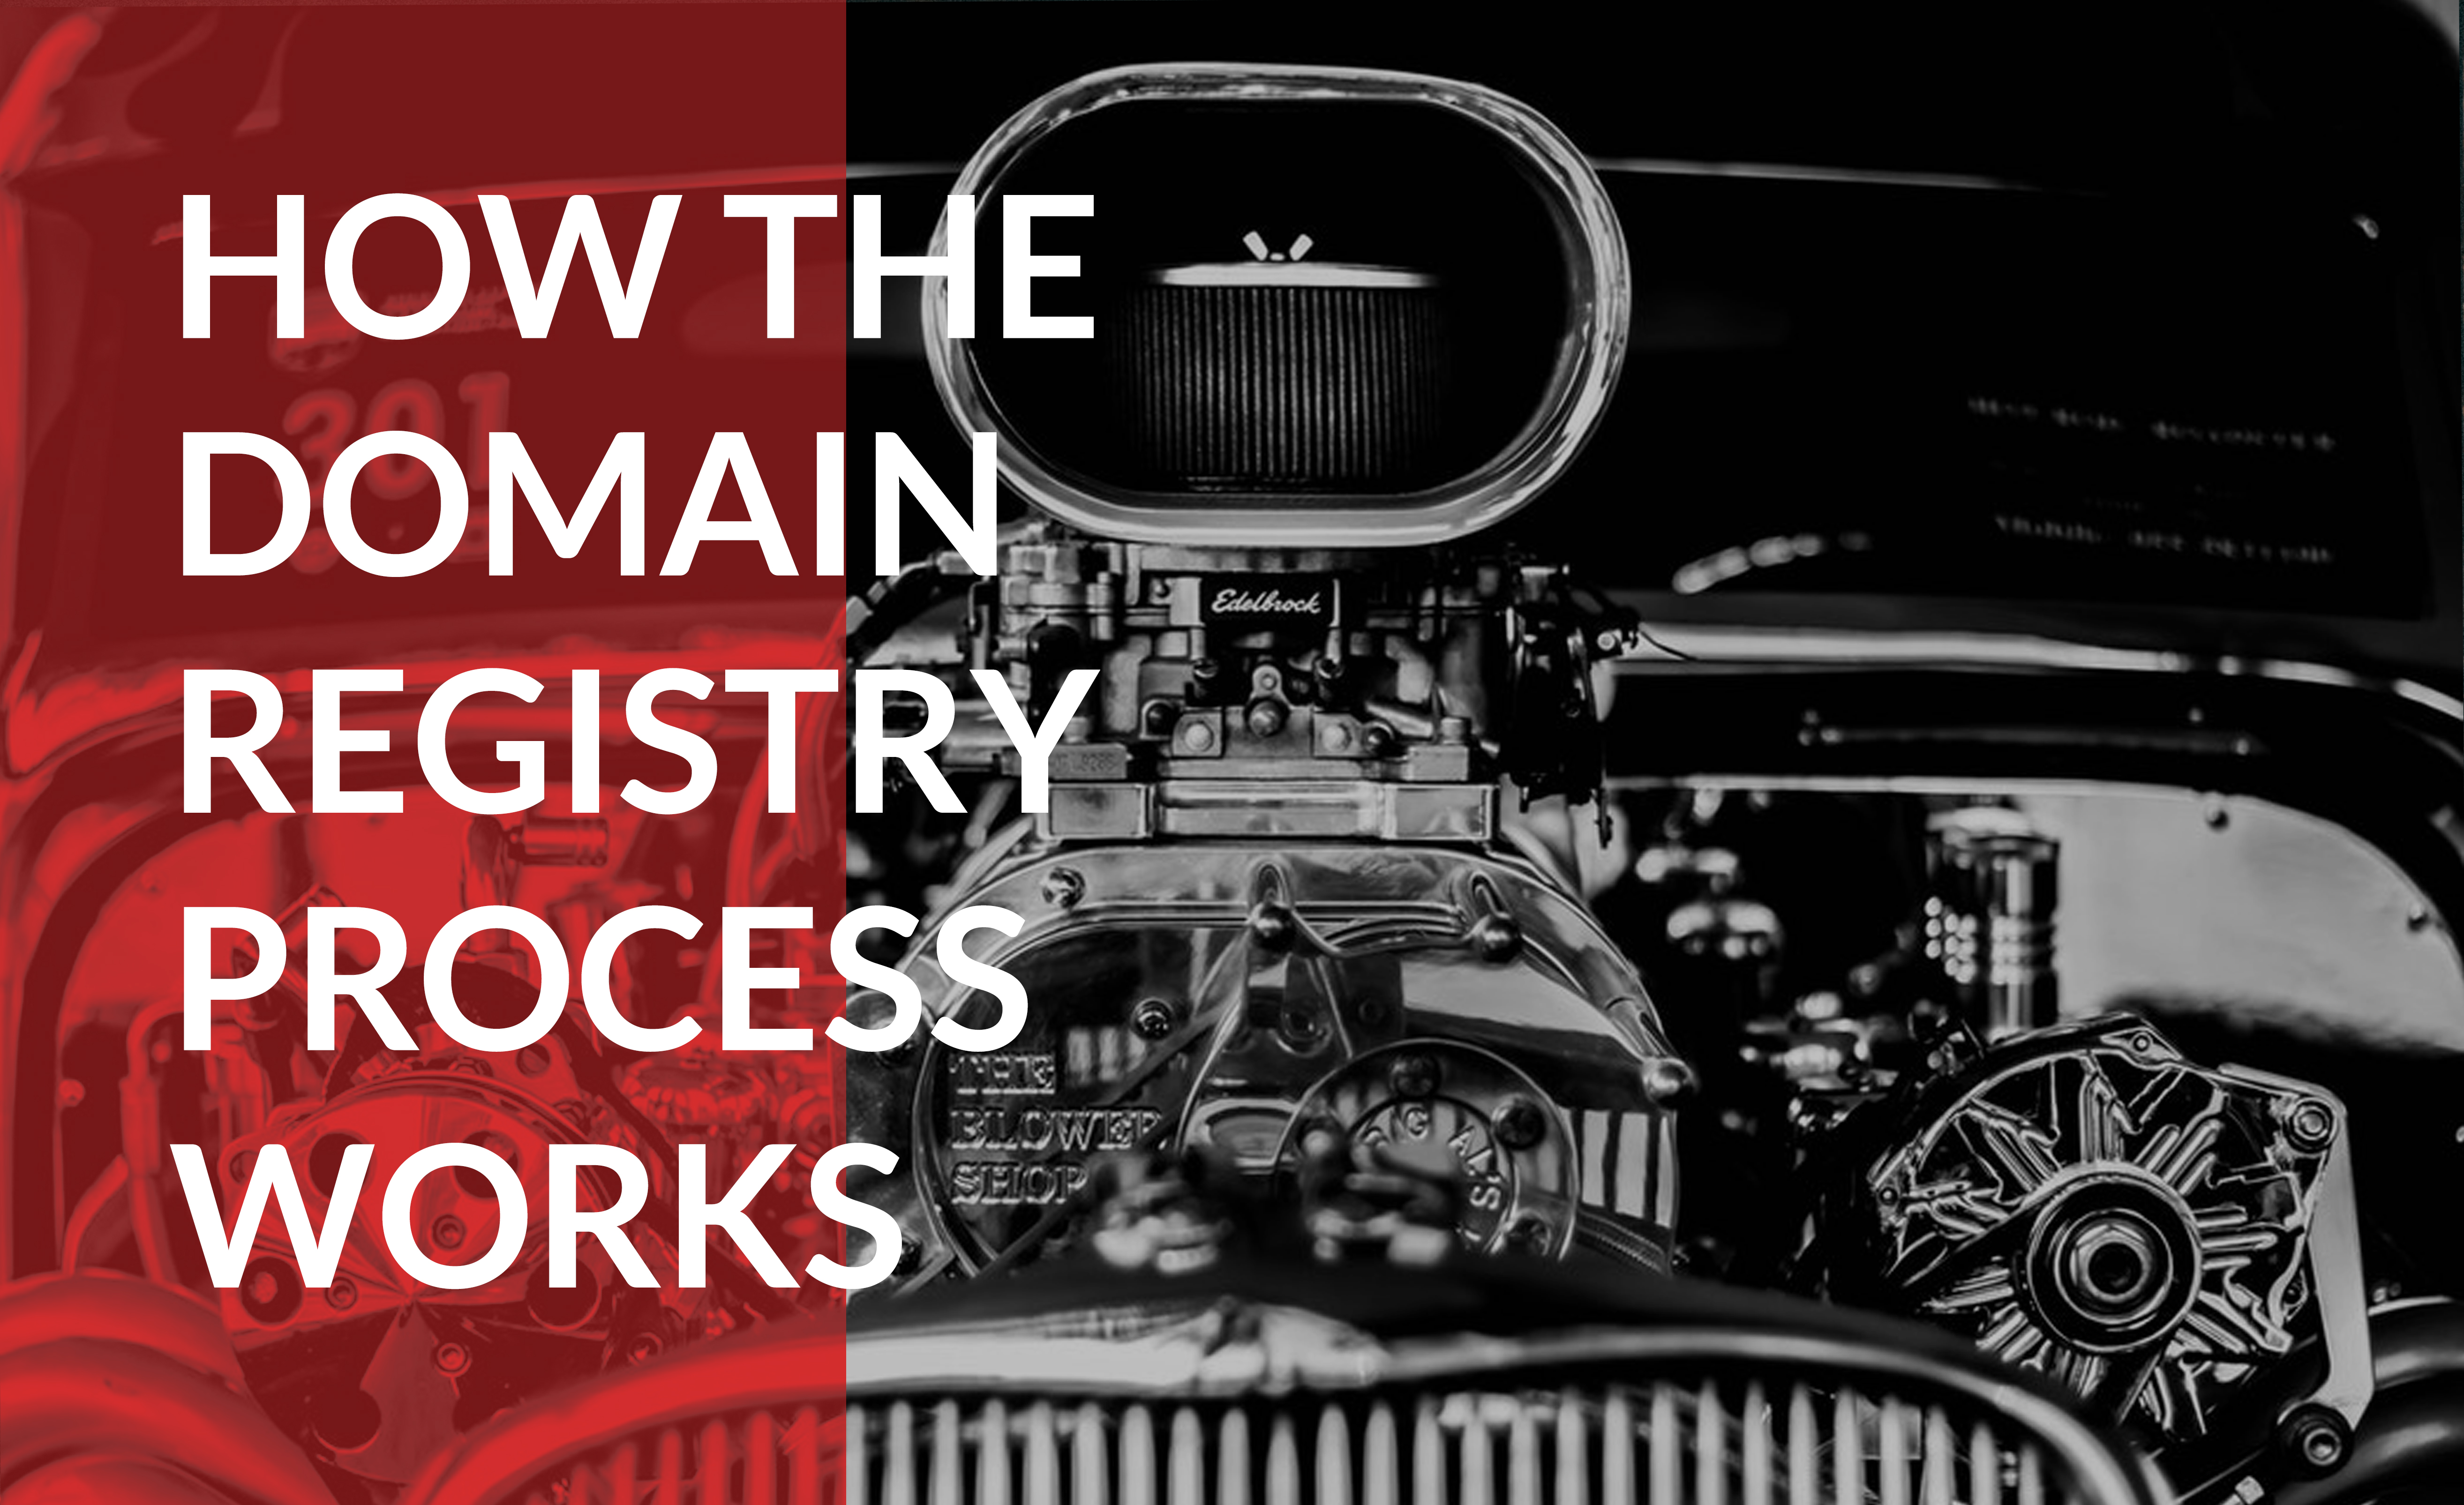 Peek under the hood of the domain registration process to learn how it works.